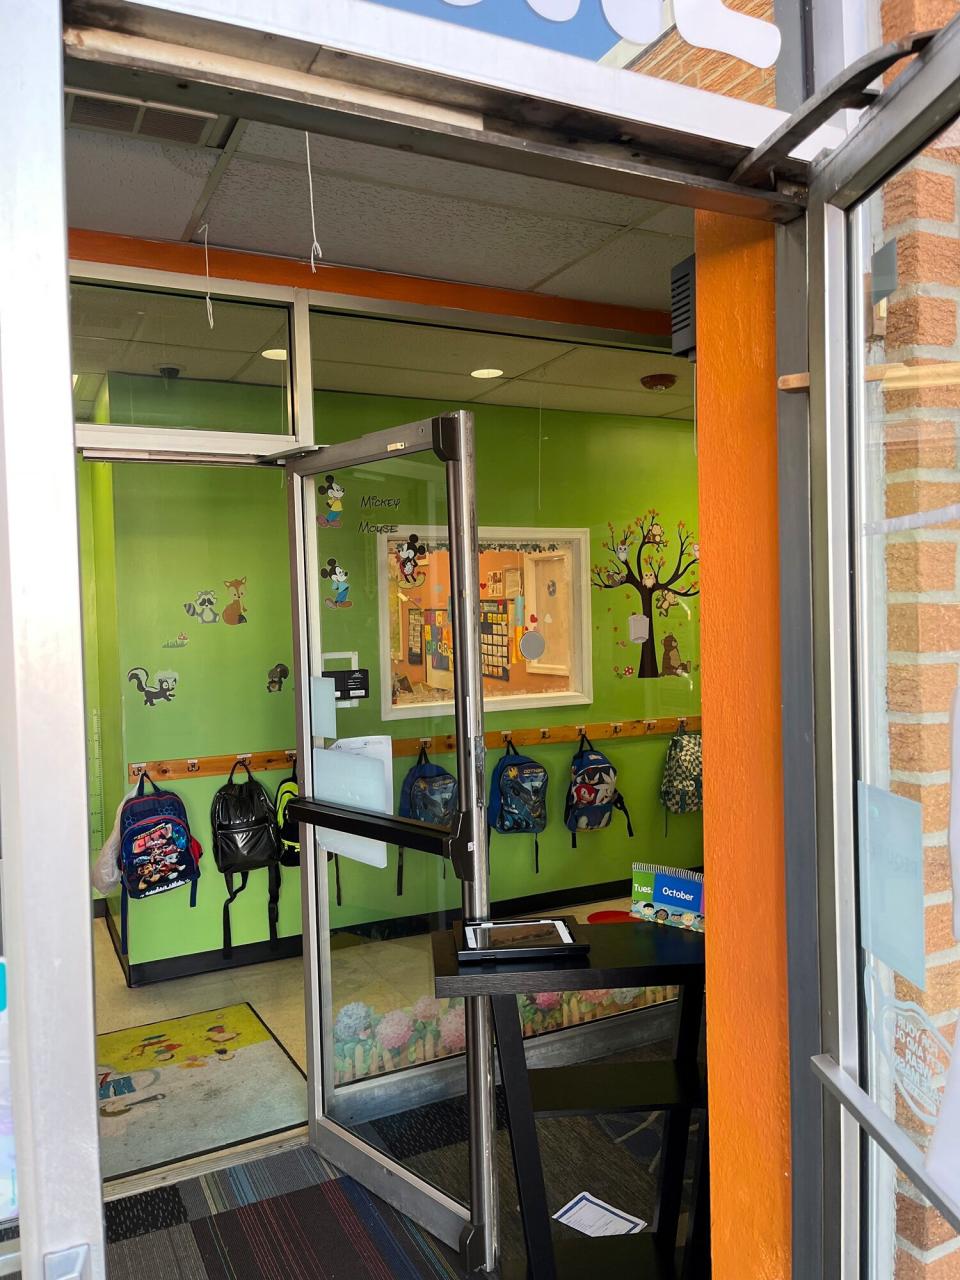 Children's backpacks can be seen from the entrance way of Happy Smiles Learning Center in Allentown, Pa., after a carbon monoxide leak was reported, Tuesday, Oct. 11, 2022.